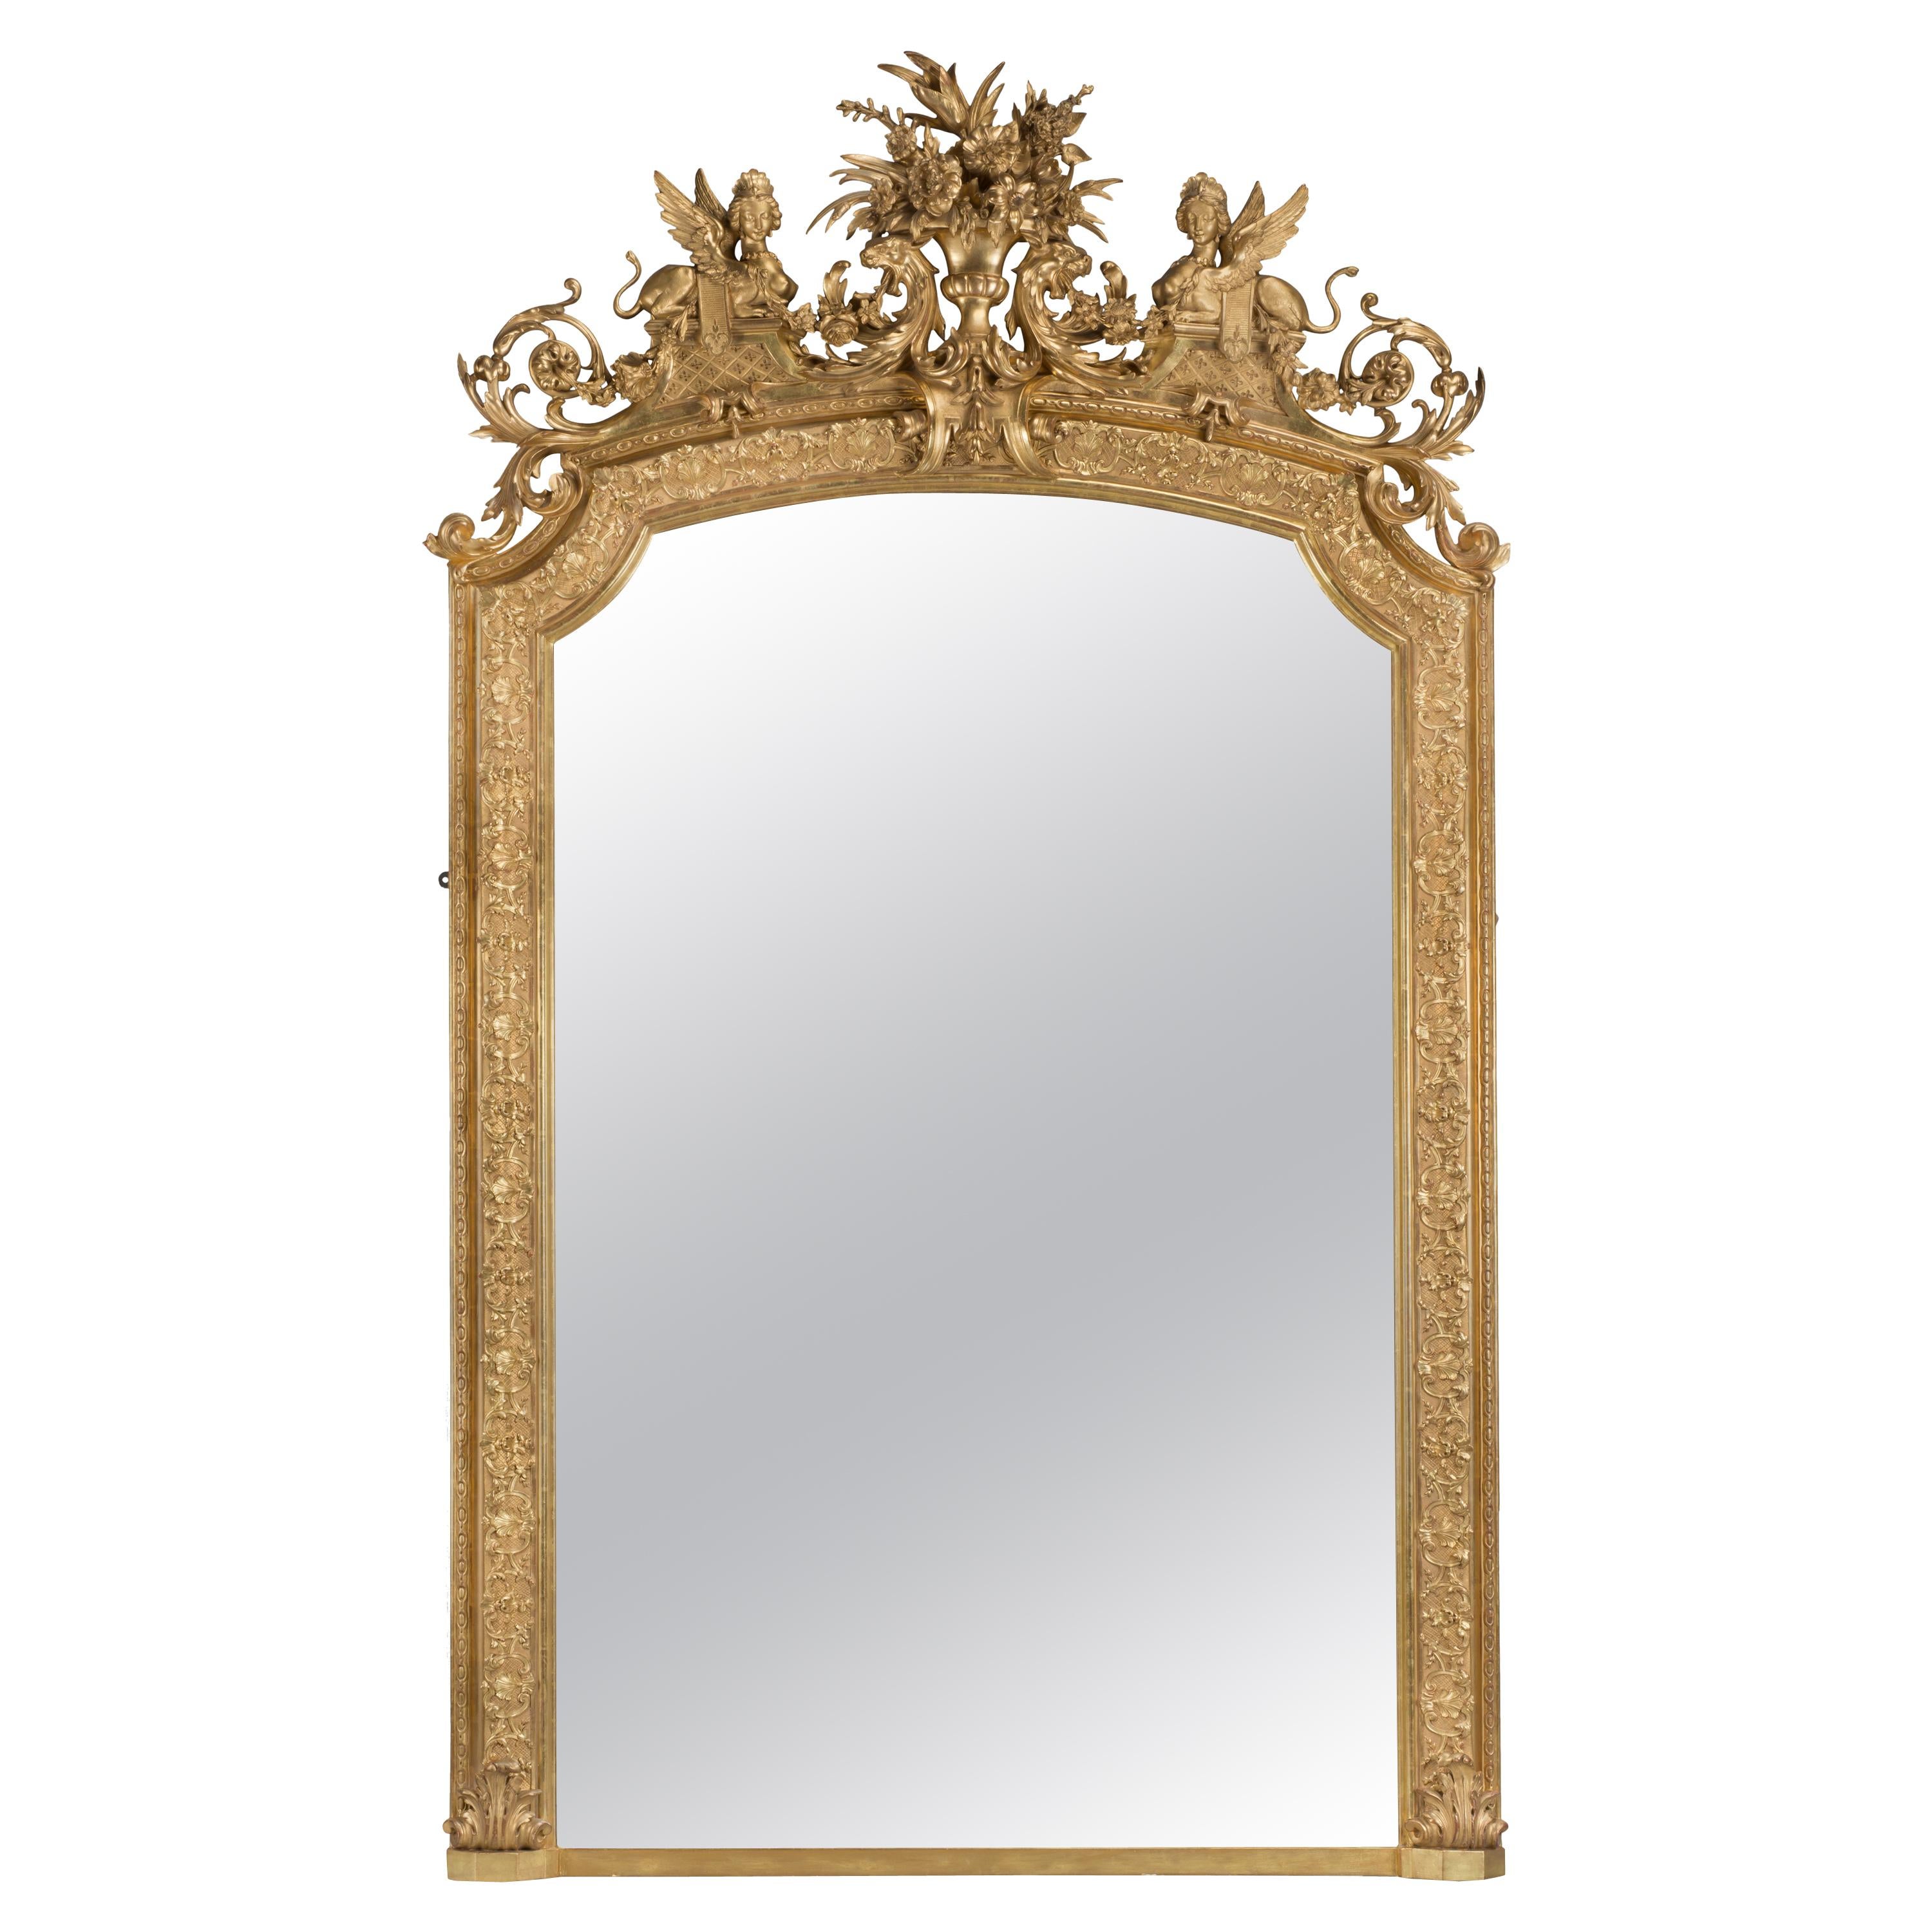 Impressive Louis XVI Style Carved Giltwood and Gesso Mirror, French, circa 1890 For Sale